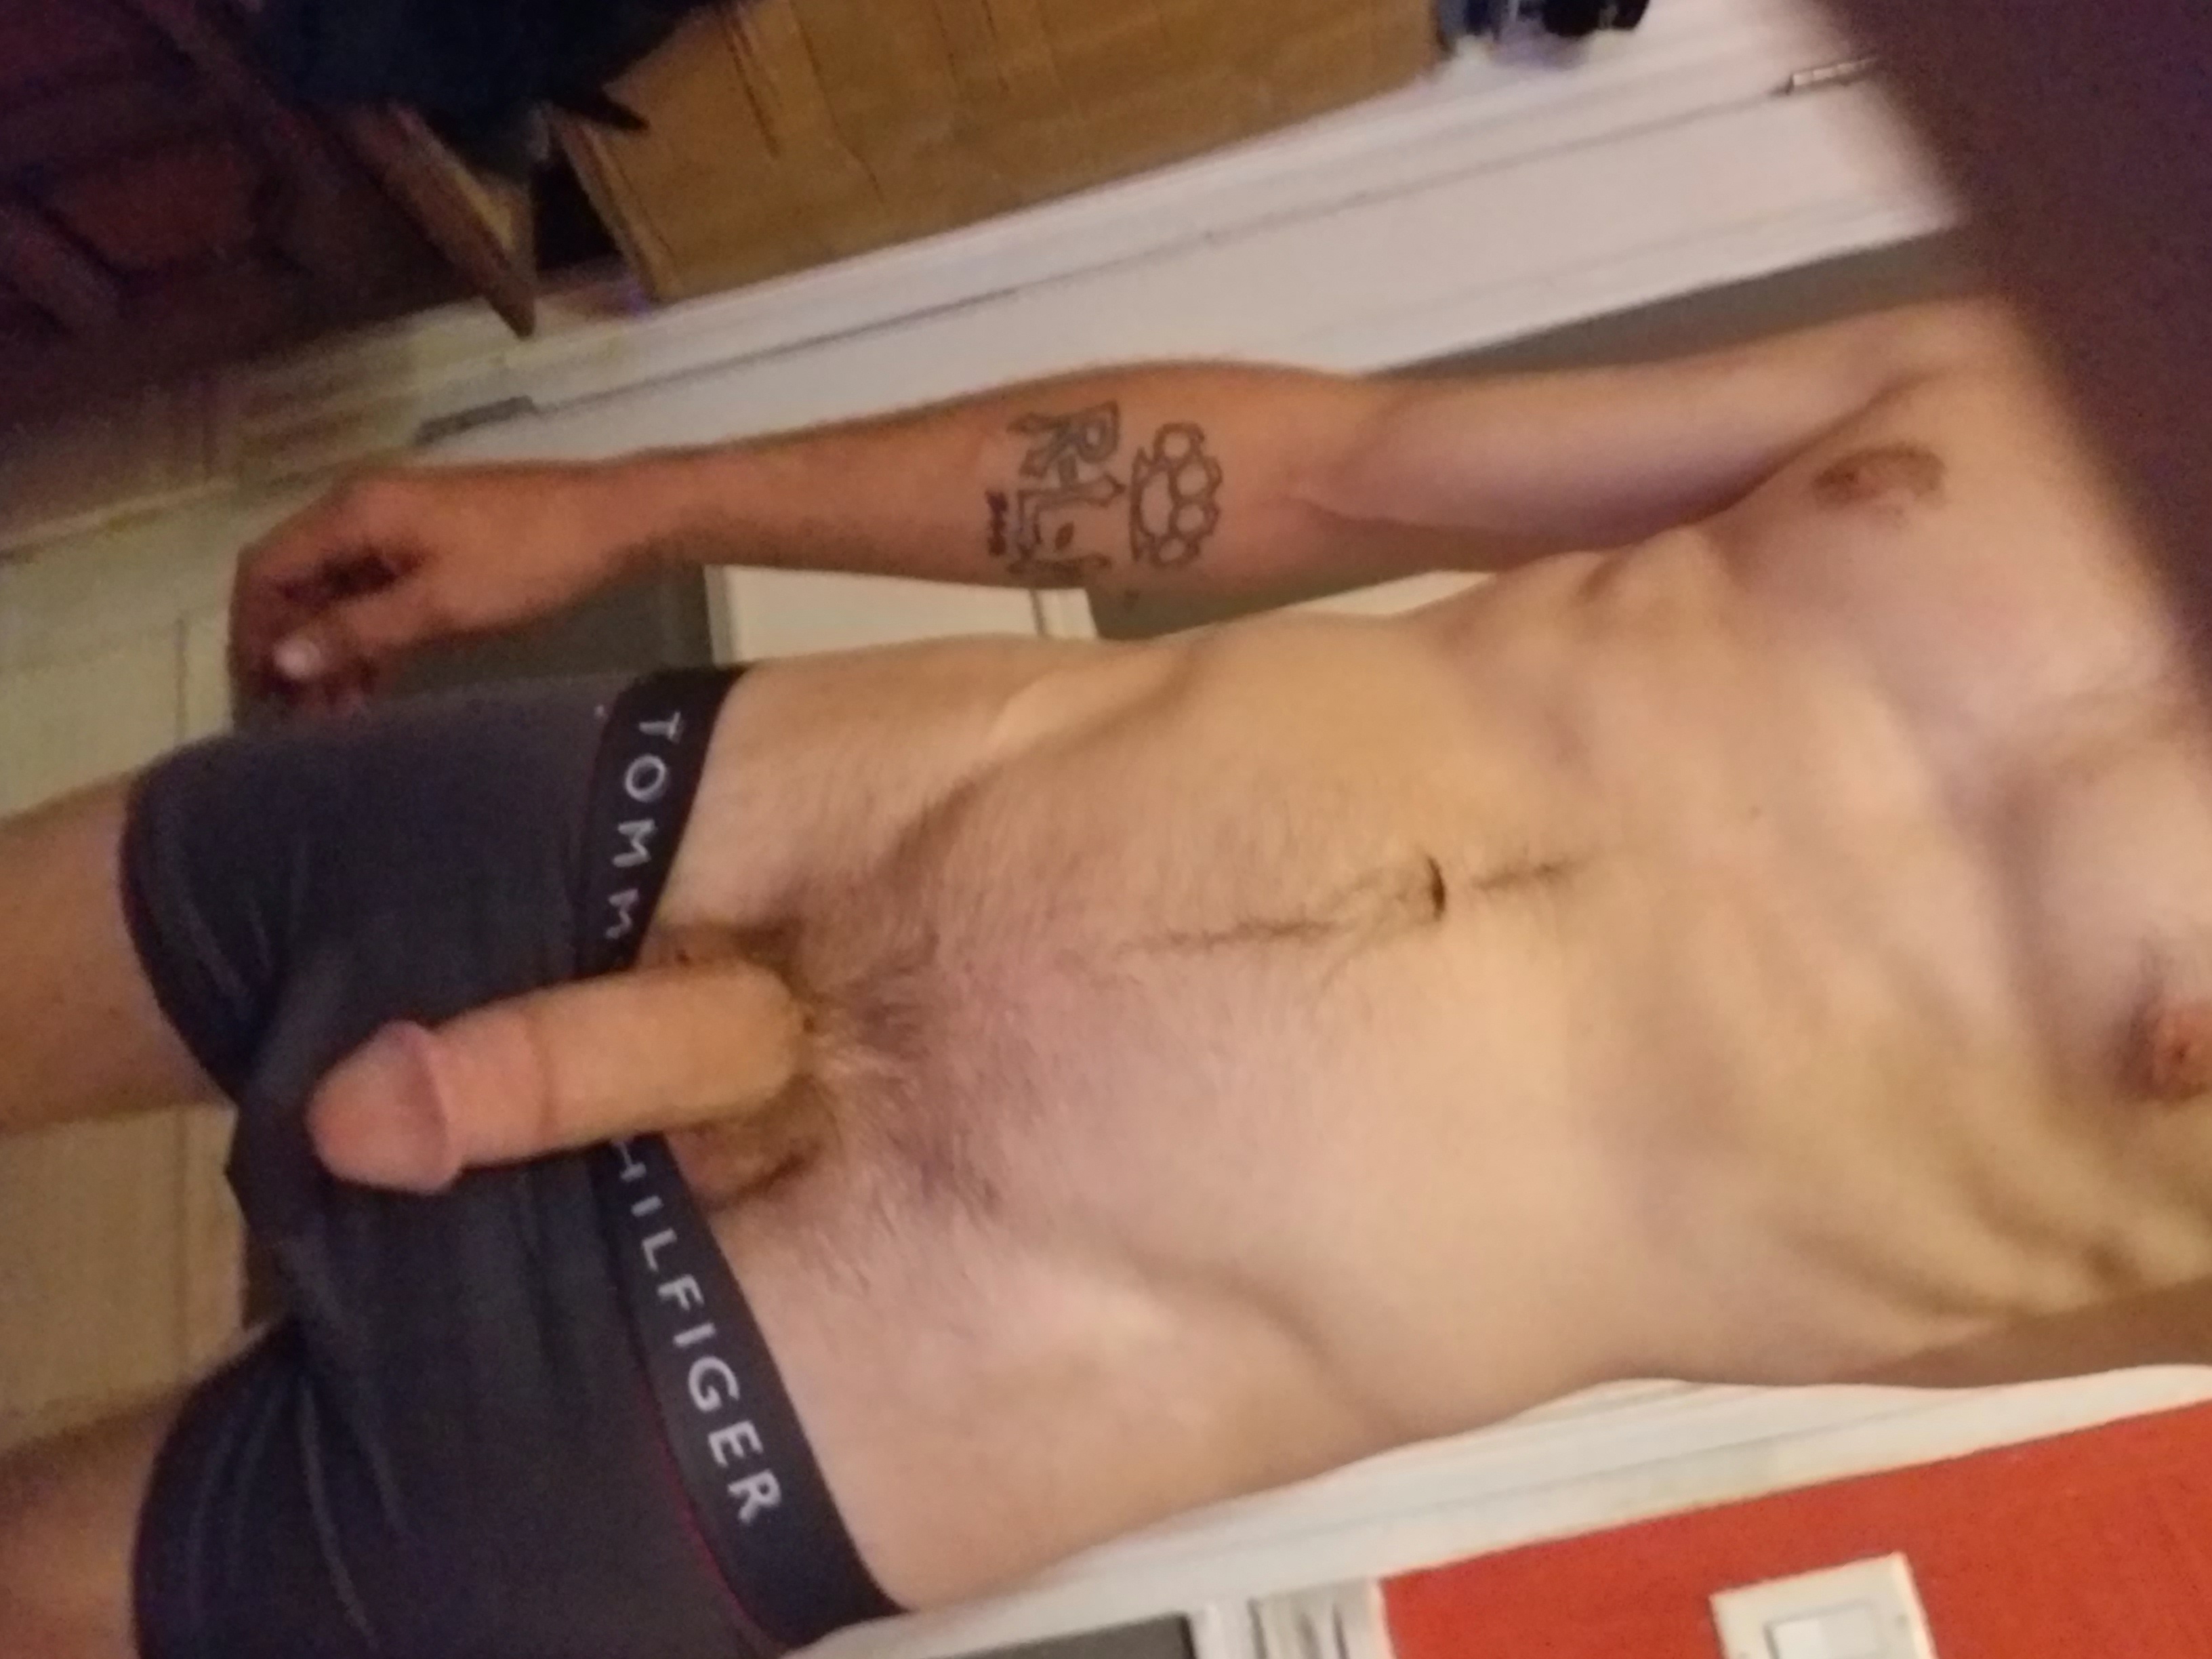 Looking for a friend and fuck buddy 